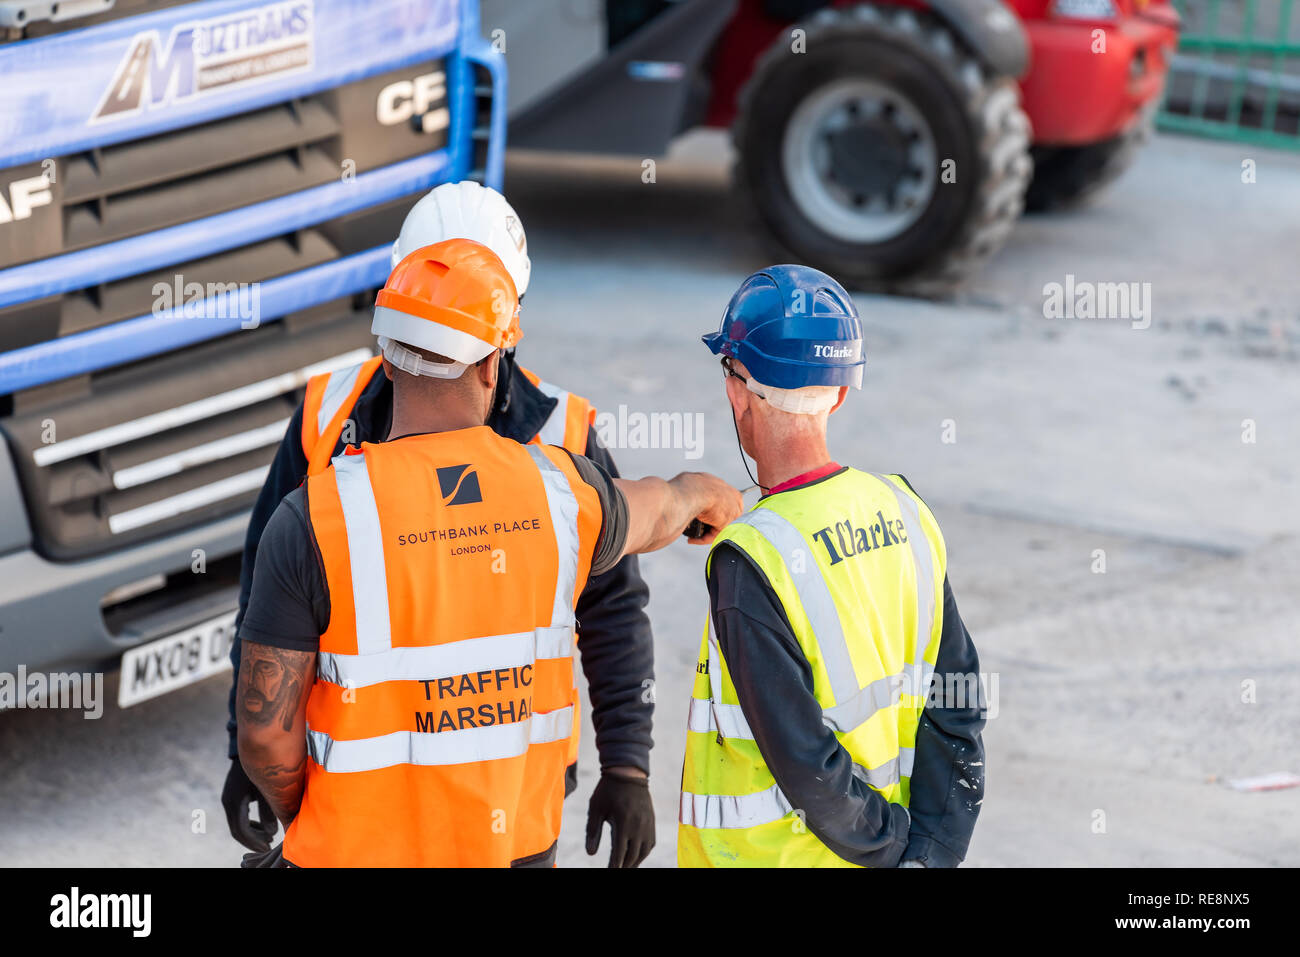 London, UK - June 22, 2018: Group of three construction worker with neon  yellow orange uniform vest clothing high angle view on city street Stock  Photo - Alamy